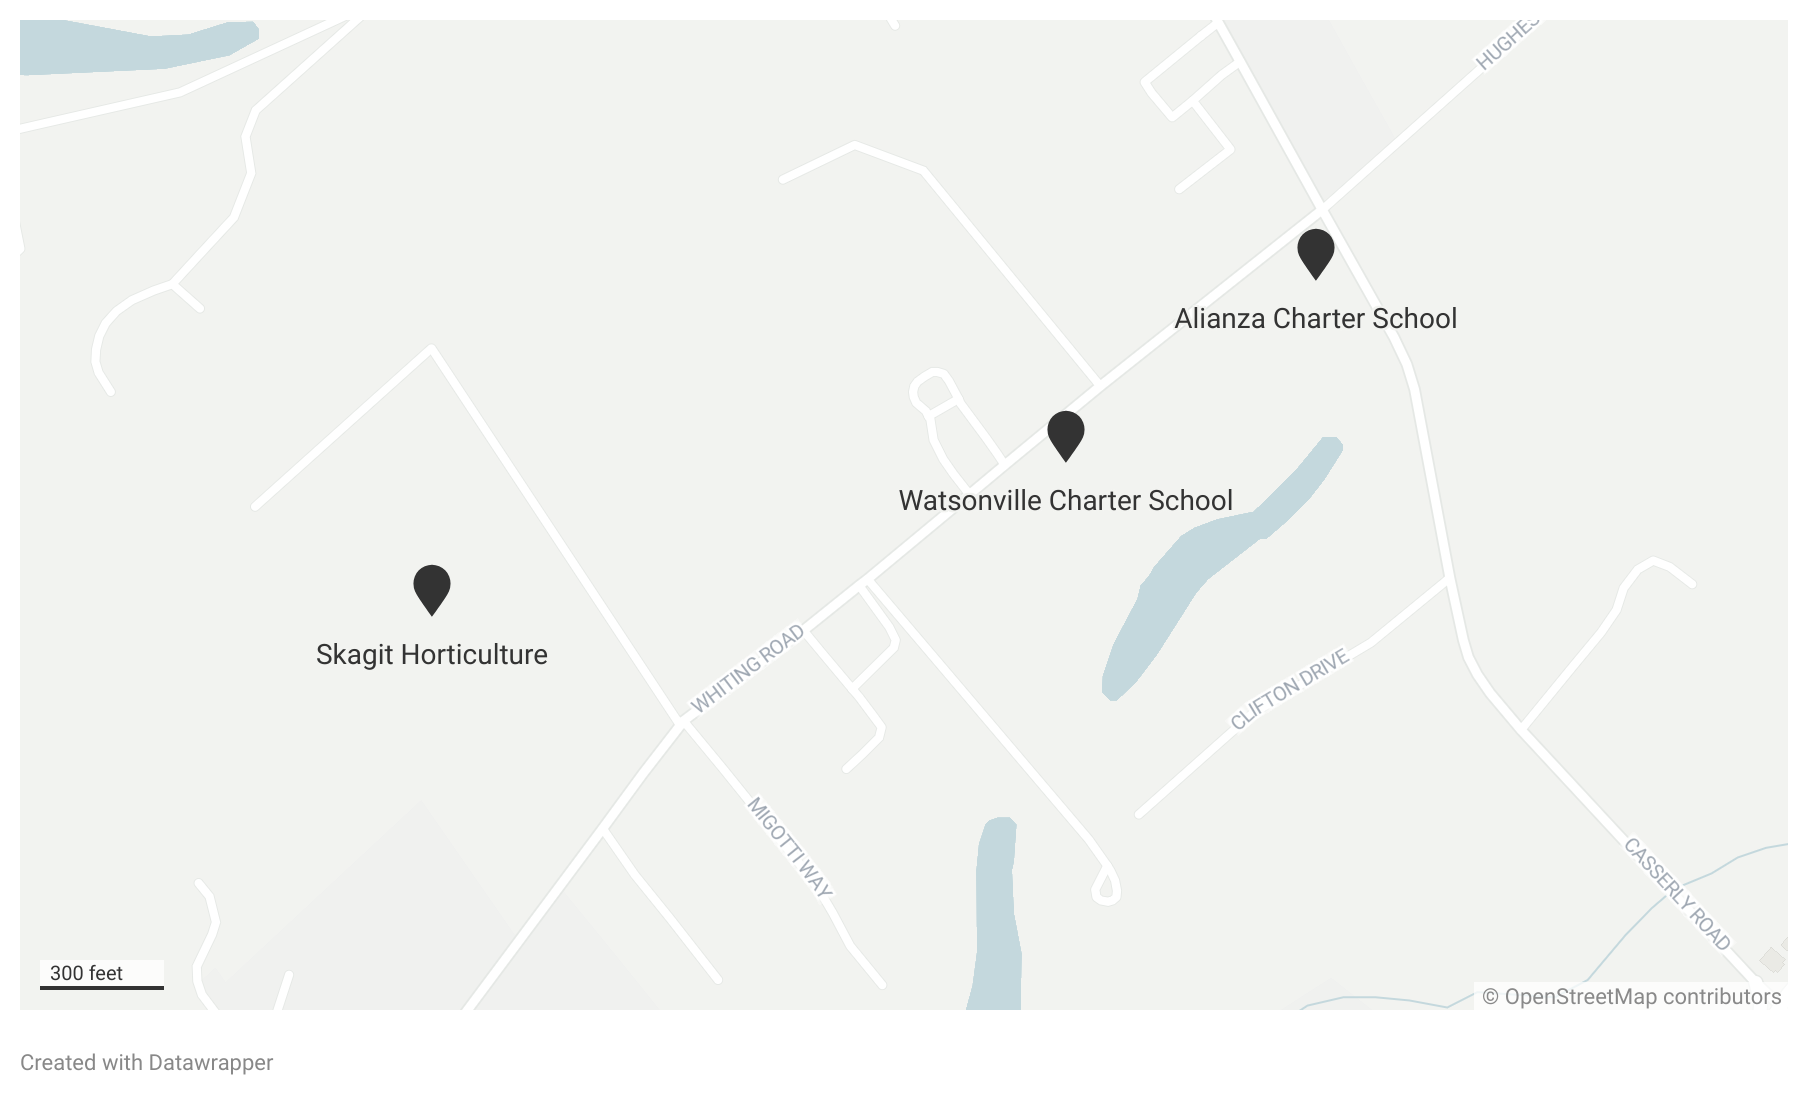 A map showing Skagit Horticulture and two nearby schools. Pesticides used near schools must be applied outside of school hours.